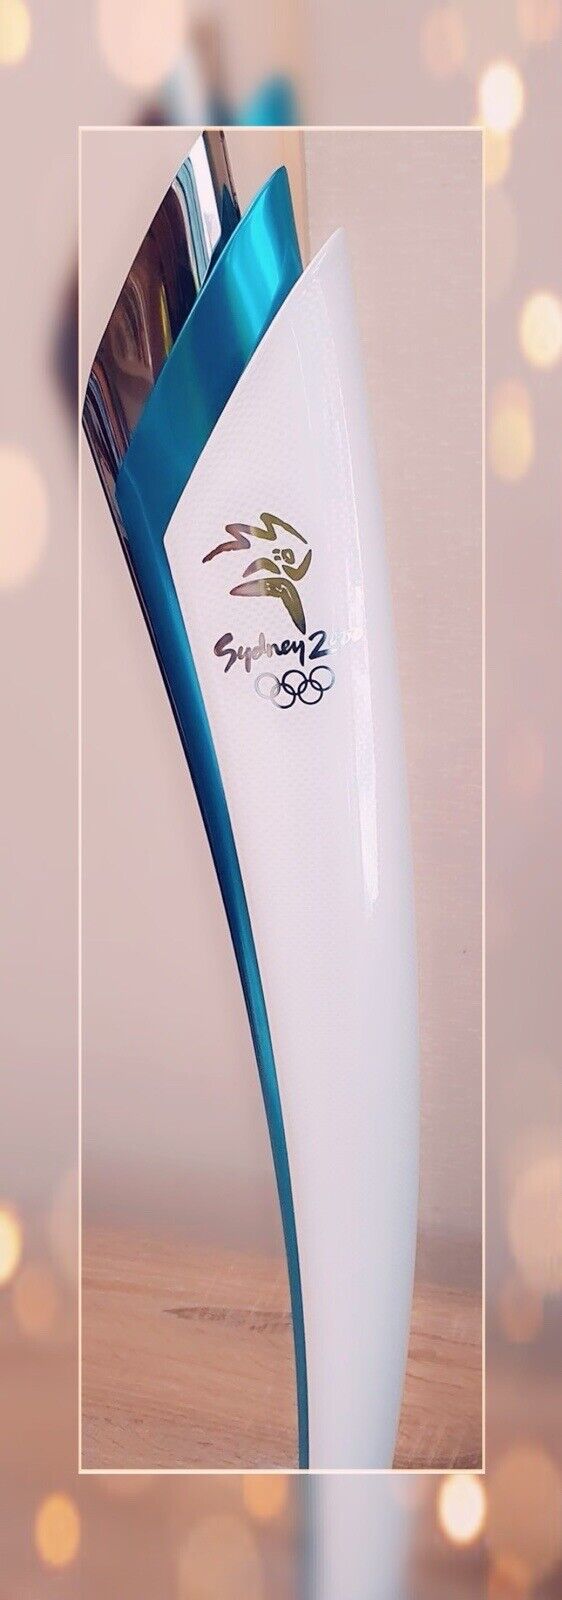 RARE 2000 olympic torch That Was Used In OLYMPIC Relay - Only 1400 Manufactured